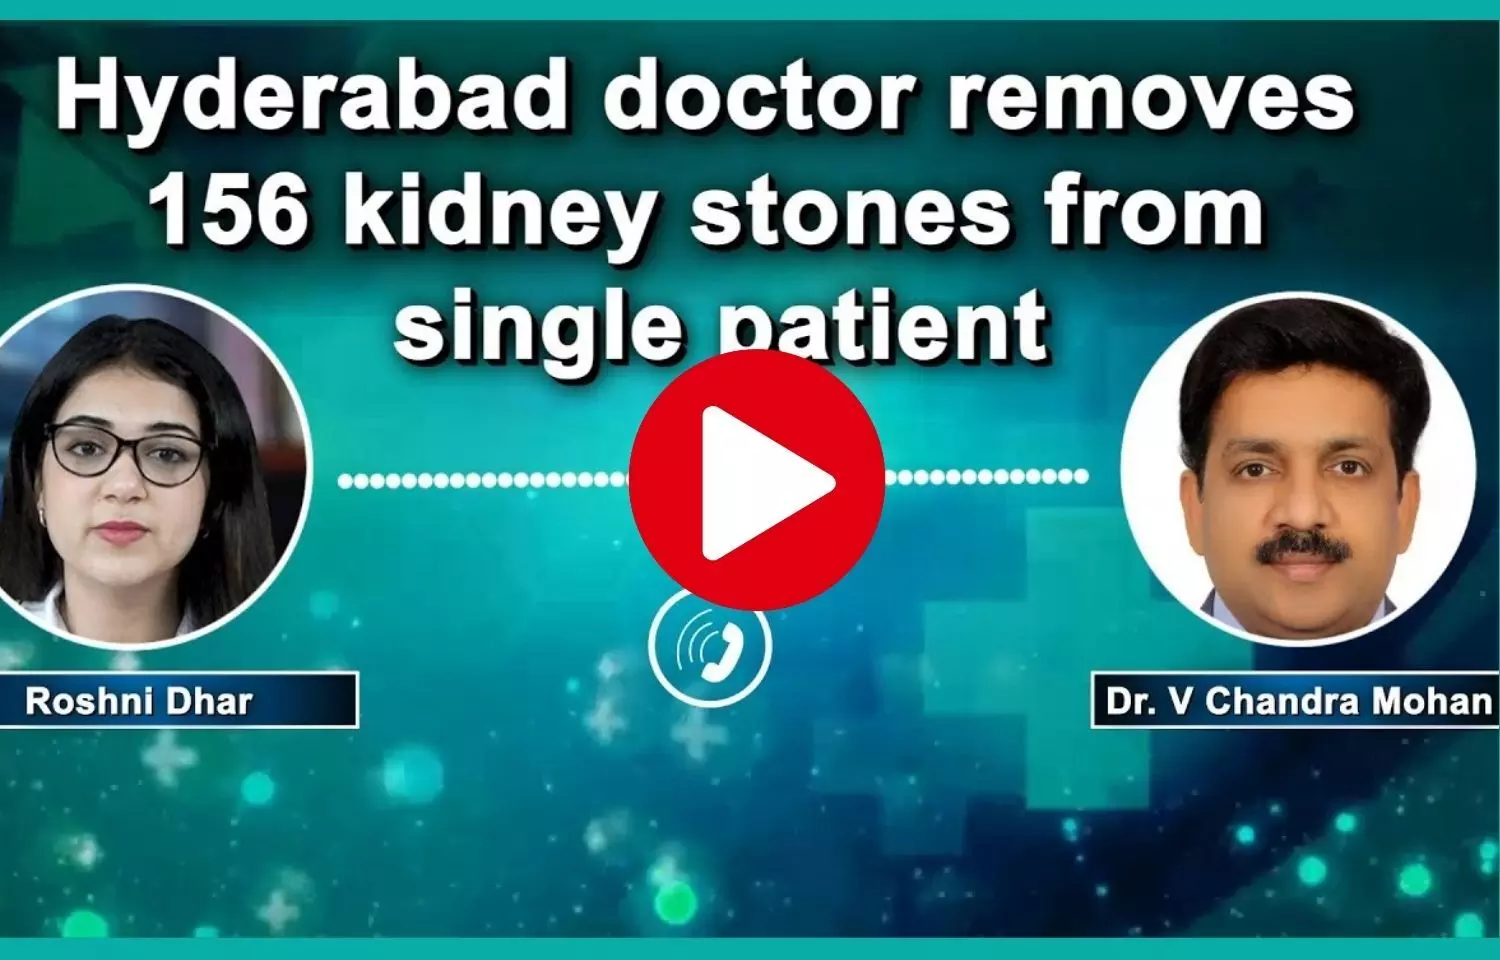 Hyderabad doctor removes 156 kidney stones from single patient